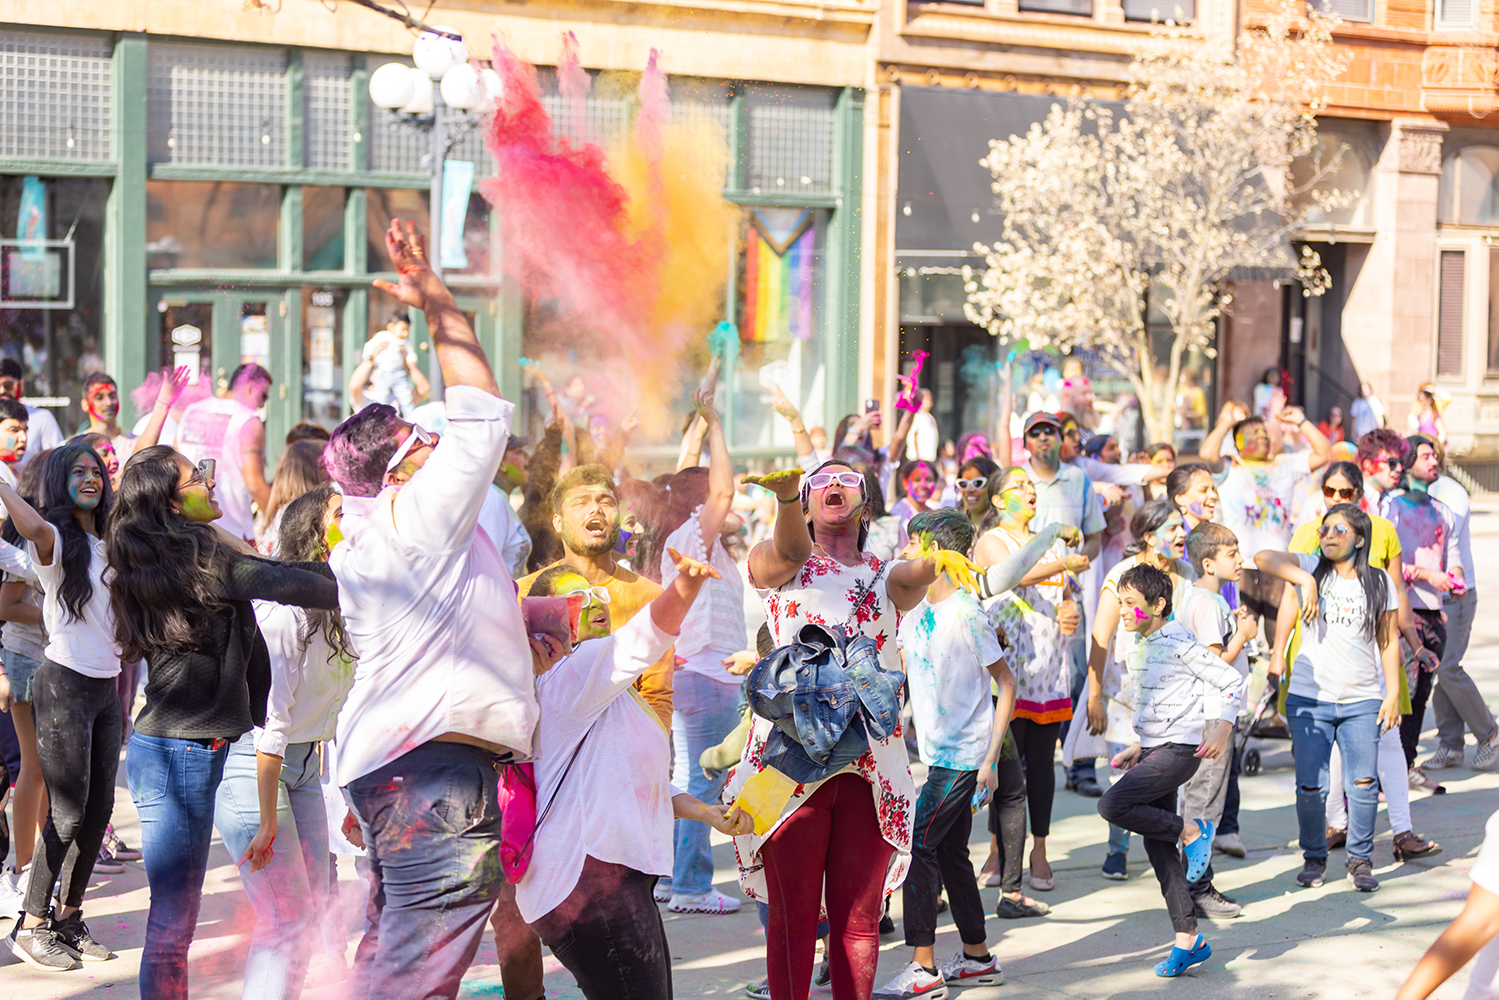 A gathering of people on a downtown street tossing color powder into the the air to celebrate Holi